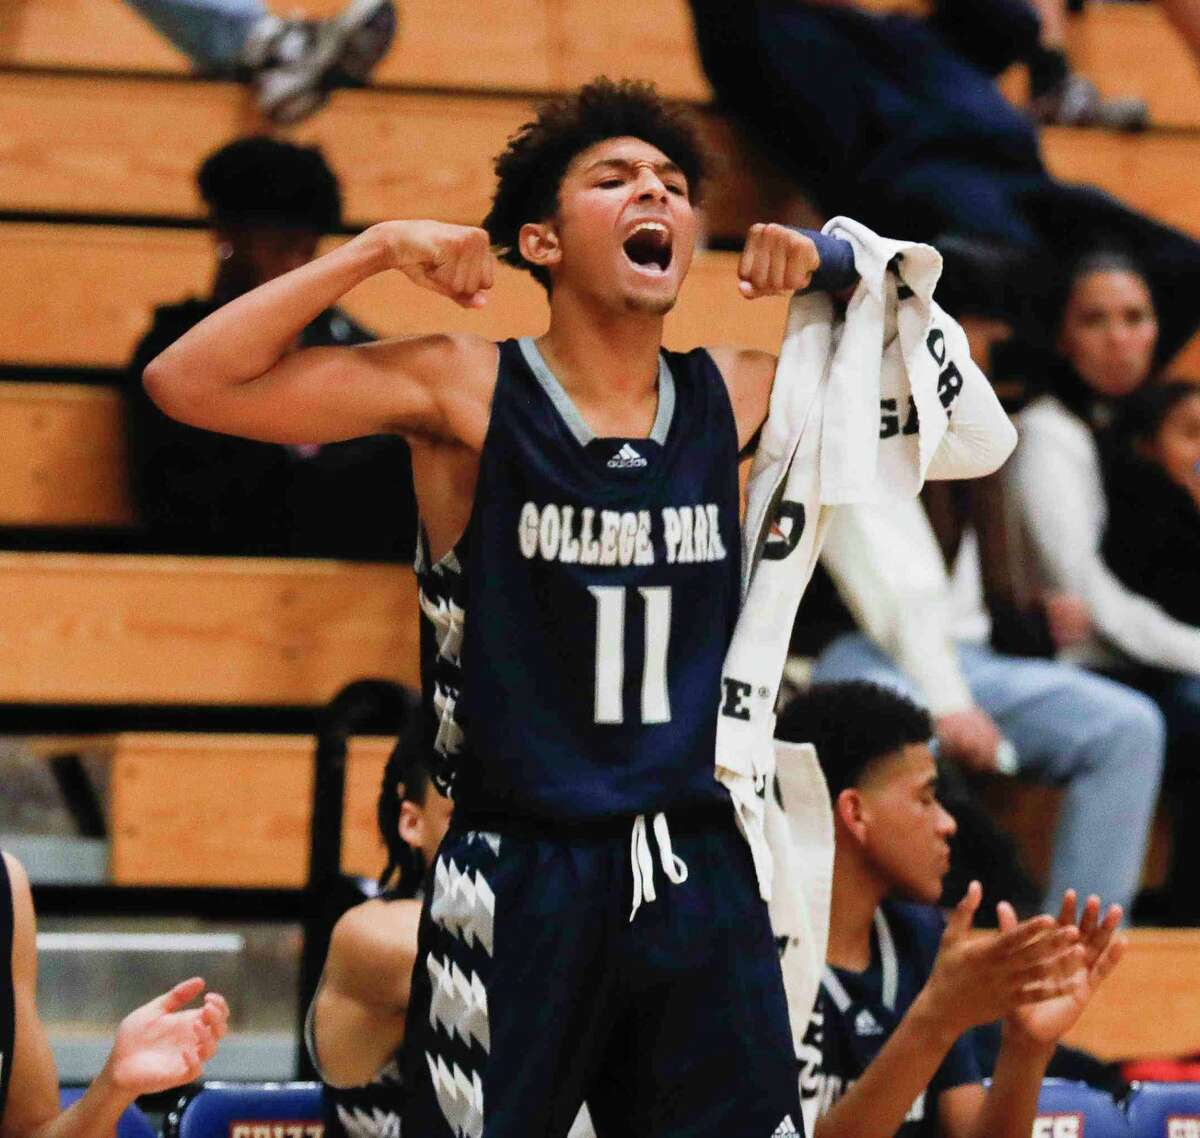 College Park guard Ty Buckmon (11), shown here earlier this week, hit the 1,000-career points mark when he totaled 23 against Willis Friday night.